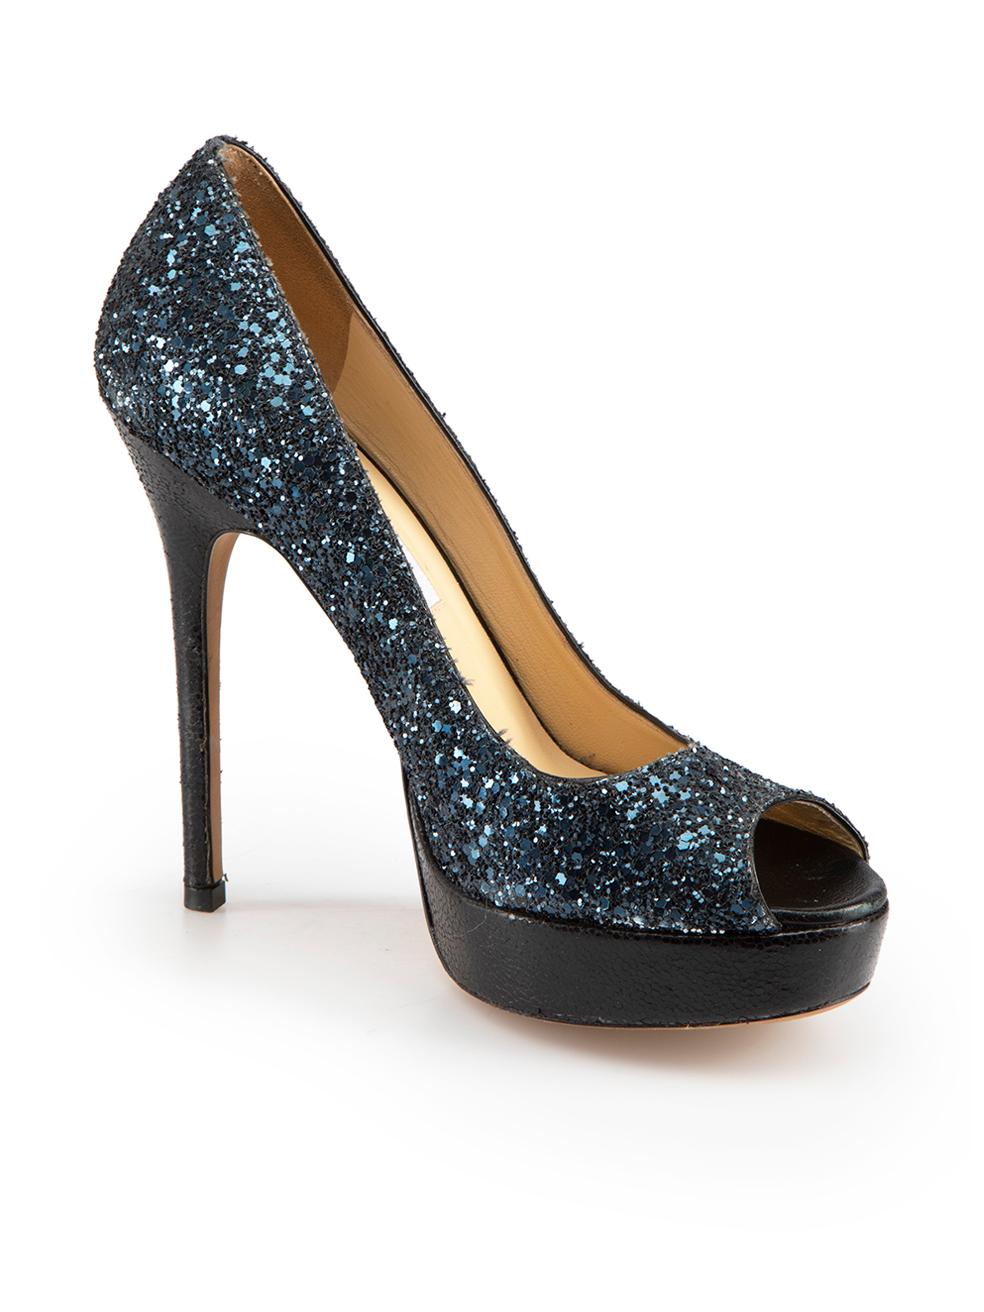 CONDITION is Very good. Minimal wear to heels is evident. Minimal creasing to inner leather and minor scuffing to left toe cap on this used Jimmy Choo designer resale item.
  
Details
Navy
Glitter
Heels
Peep toe
Slip on
High heeled
Platform
Black